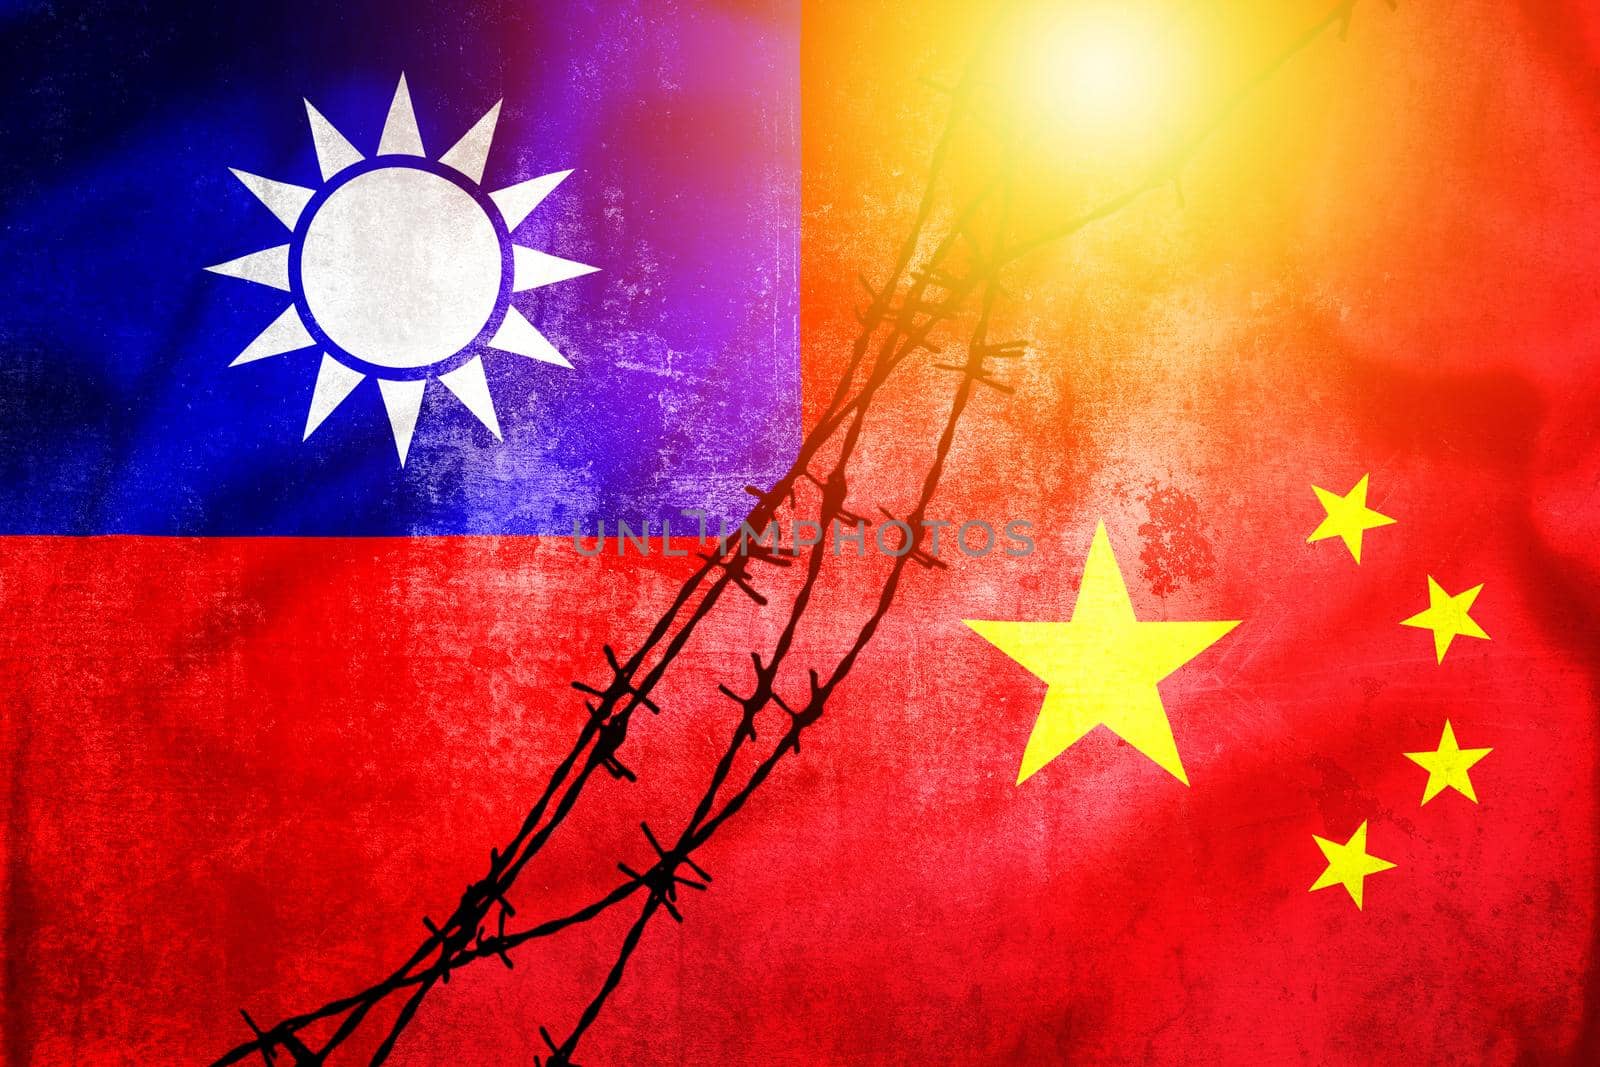 Grunge flags of Taiwan and China divided by barb wire sun haze illustration by xbrchx